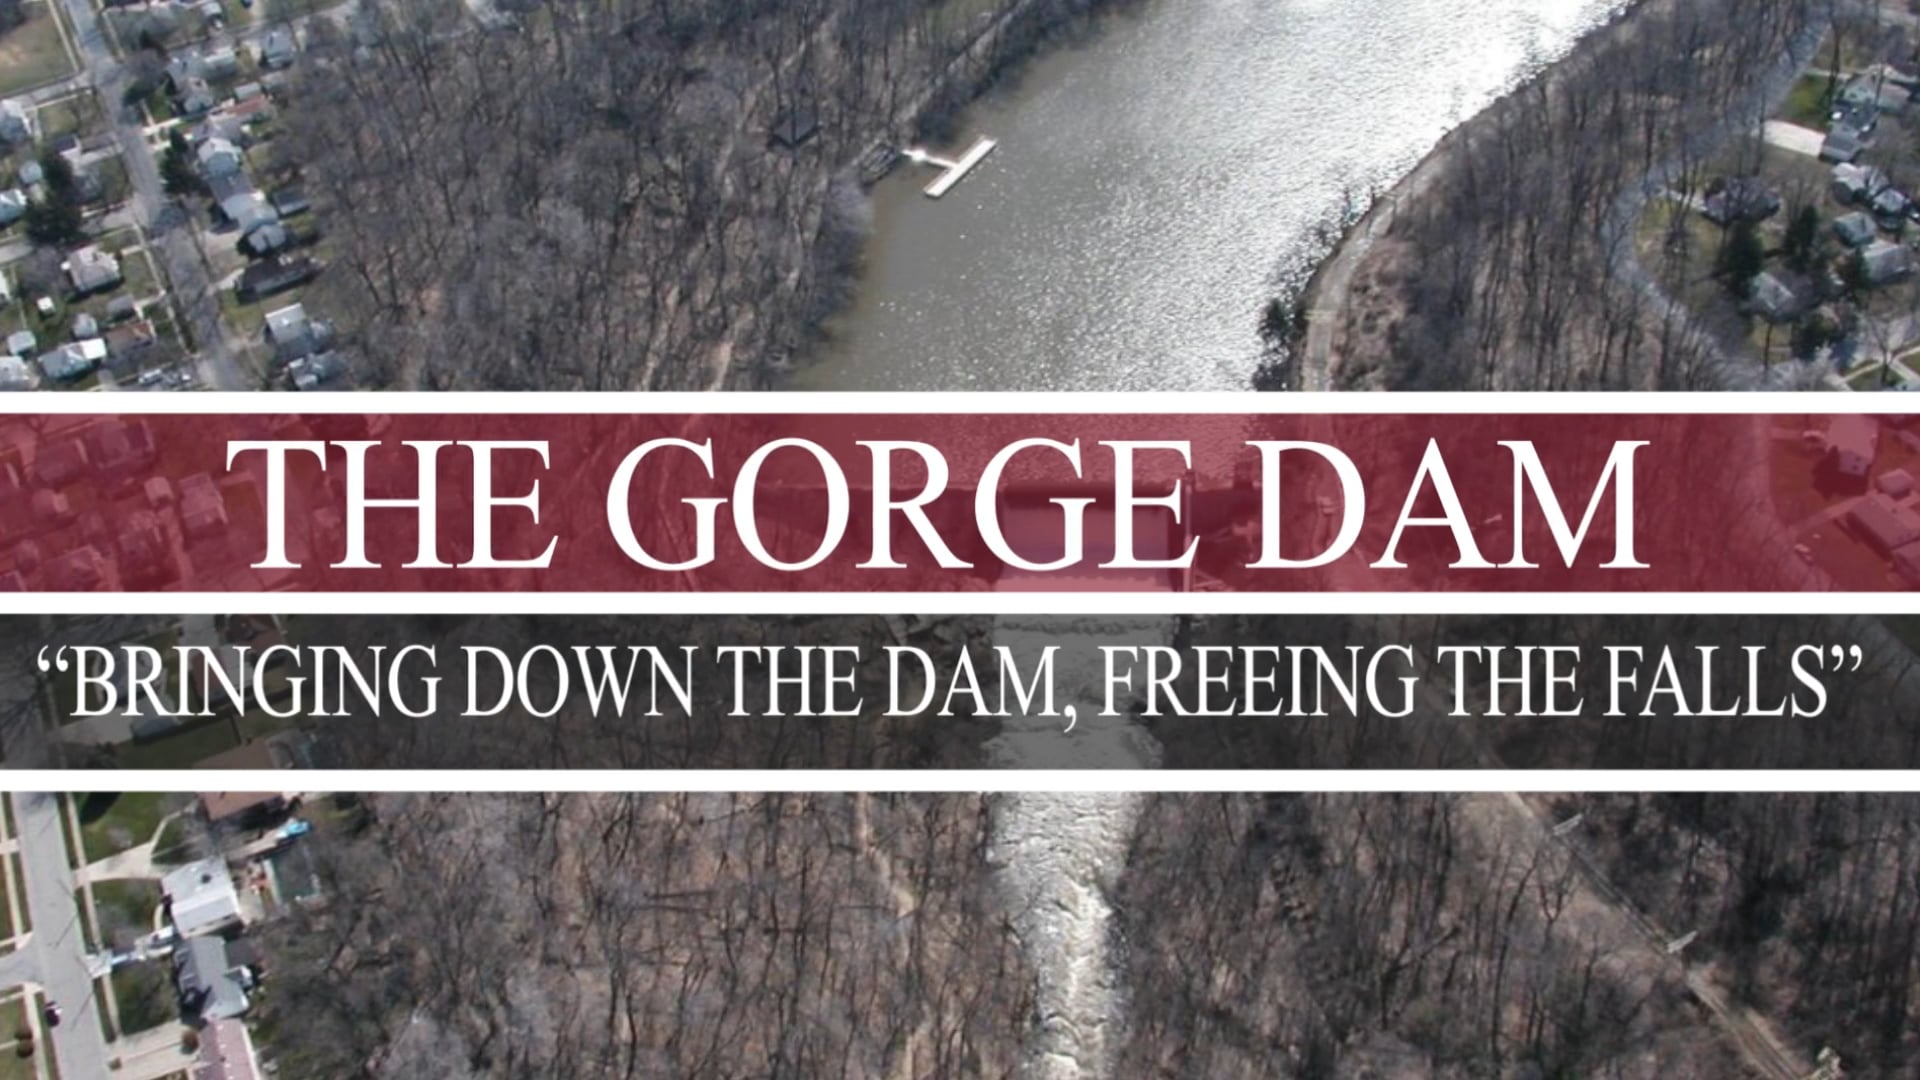 The Gorge Dam: Bringing Down the Dam, Freeing the Falls"